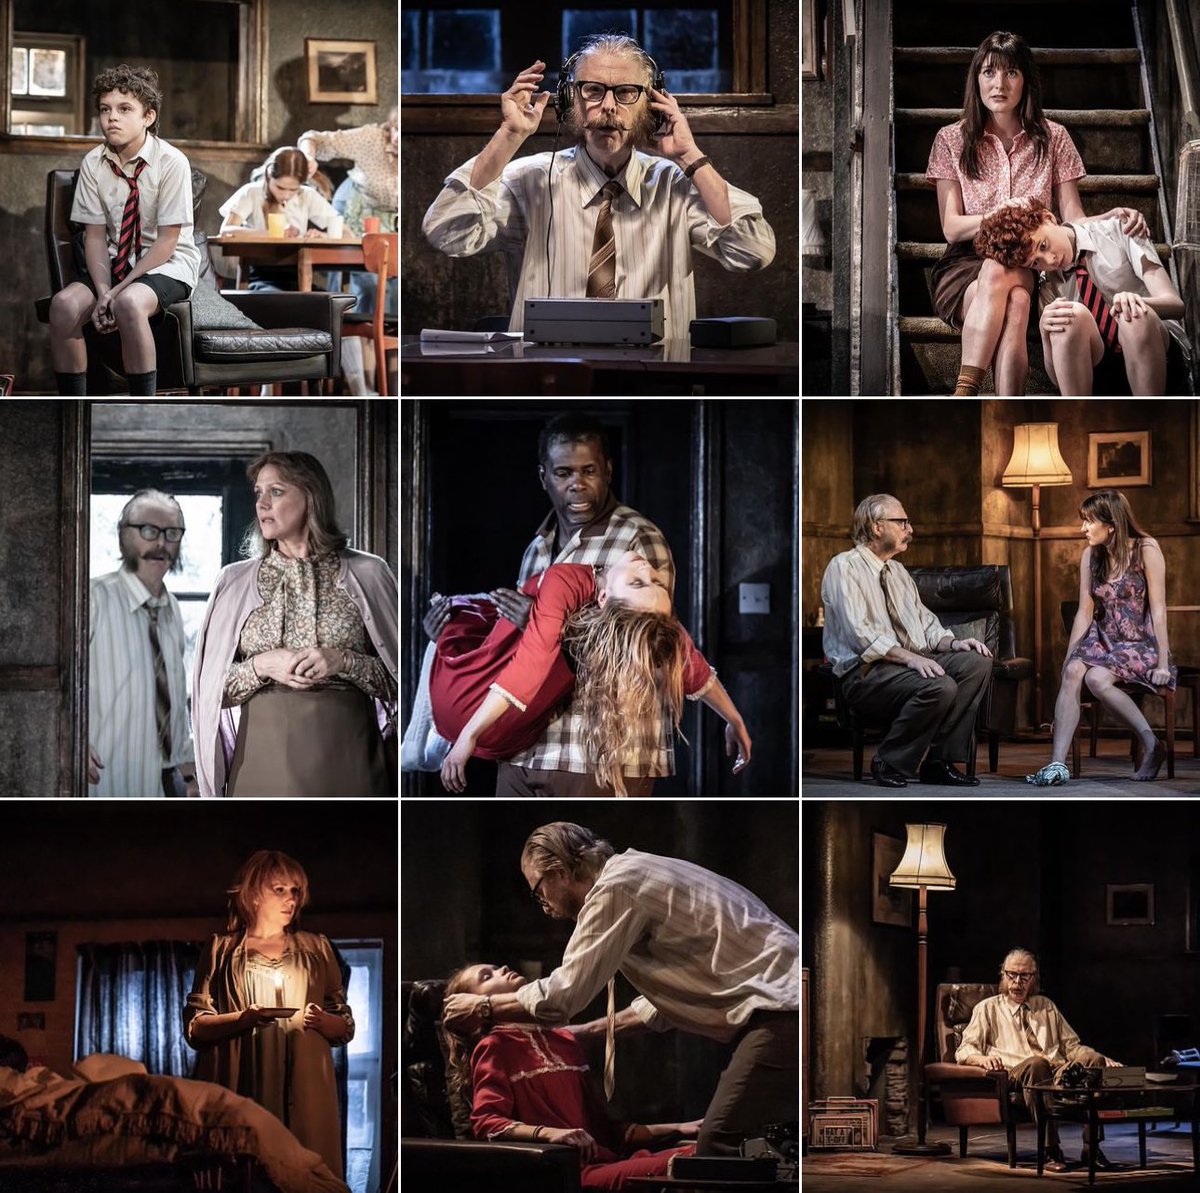 THE ENFIELD HAUNTING - Ambassadors Theatre. Photo @brennerphotos